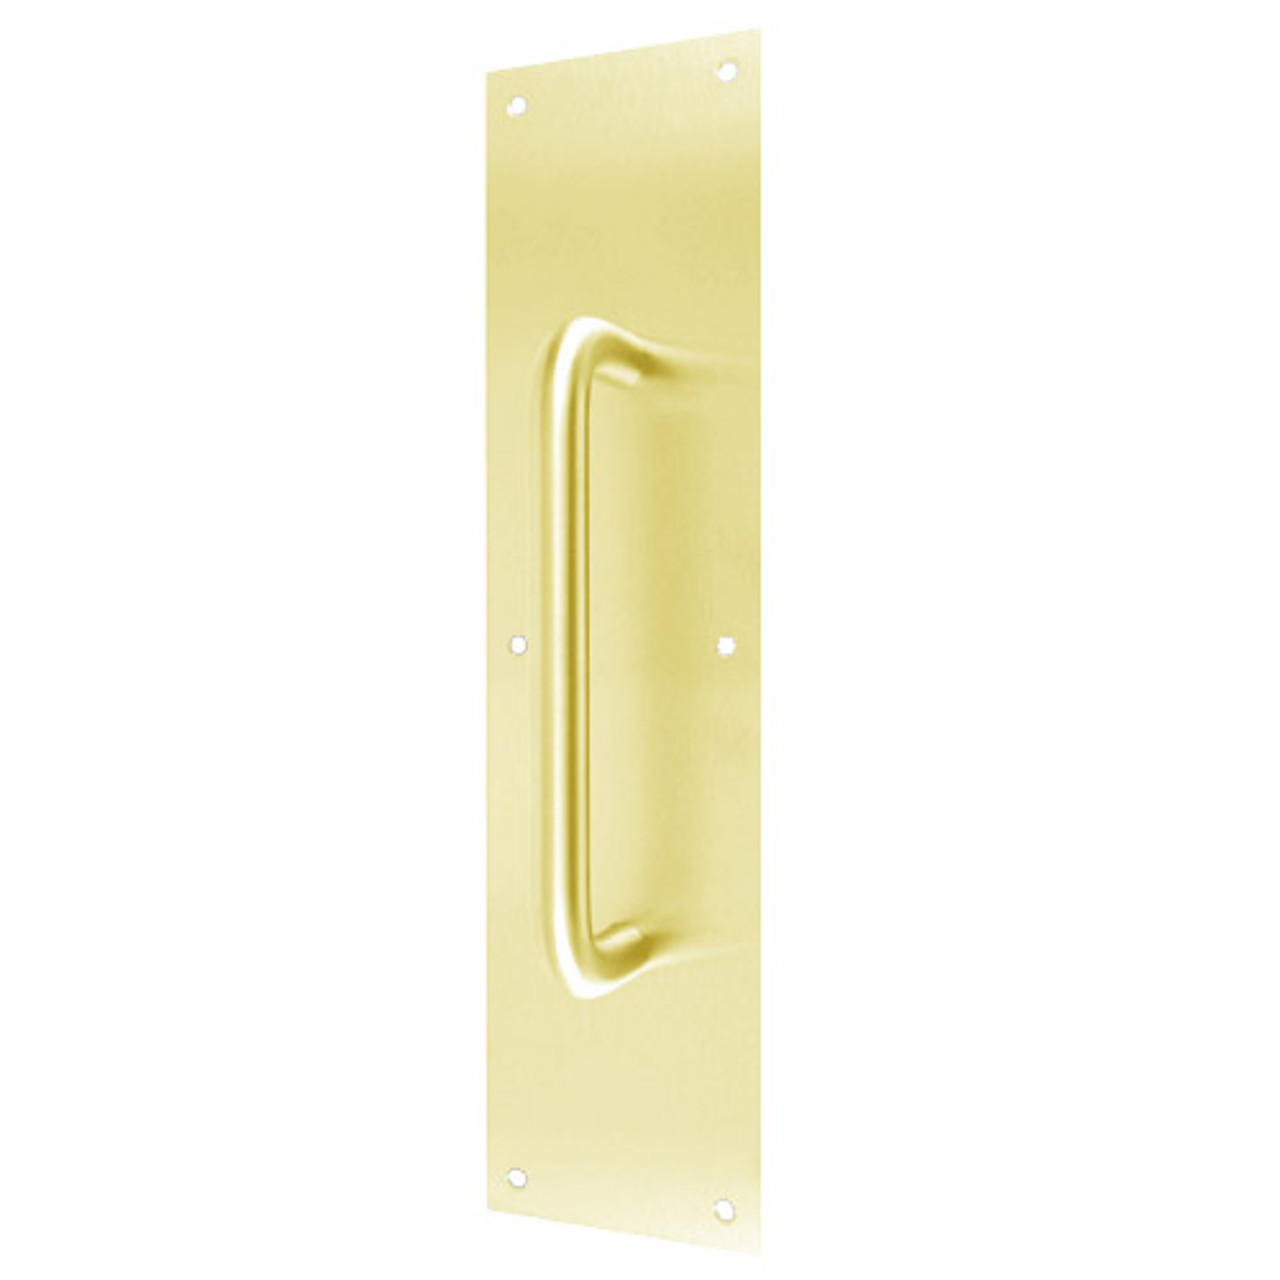 7020-605 Don Jo Pull Plates with 1" Round Pulls in Bright Brass Finish